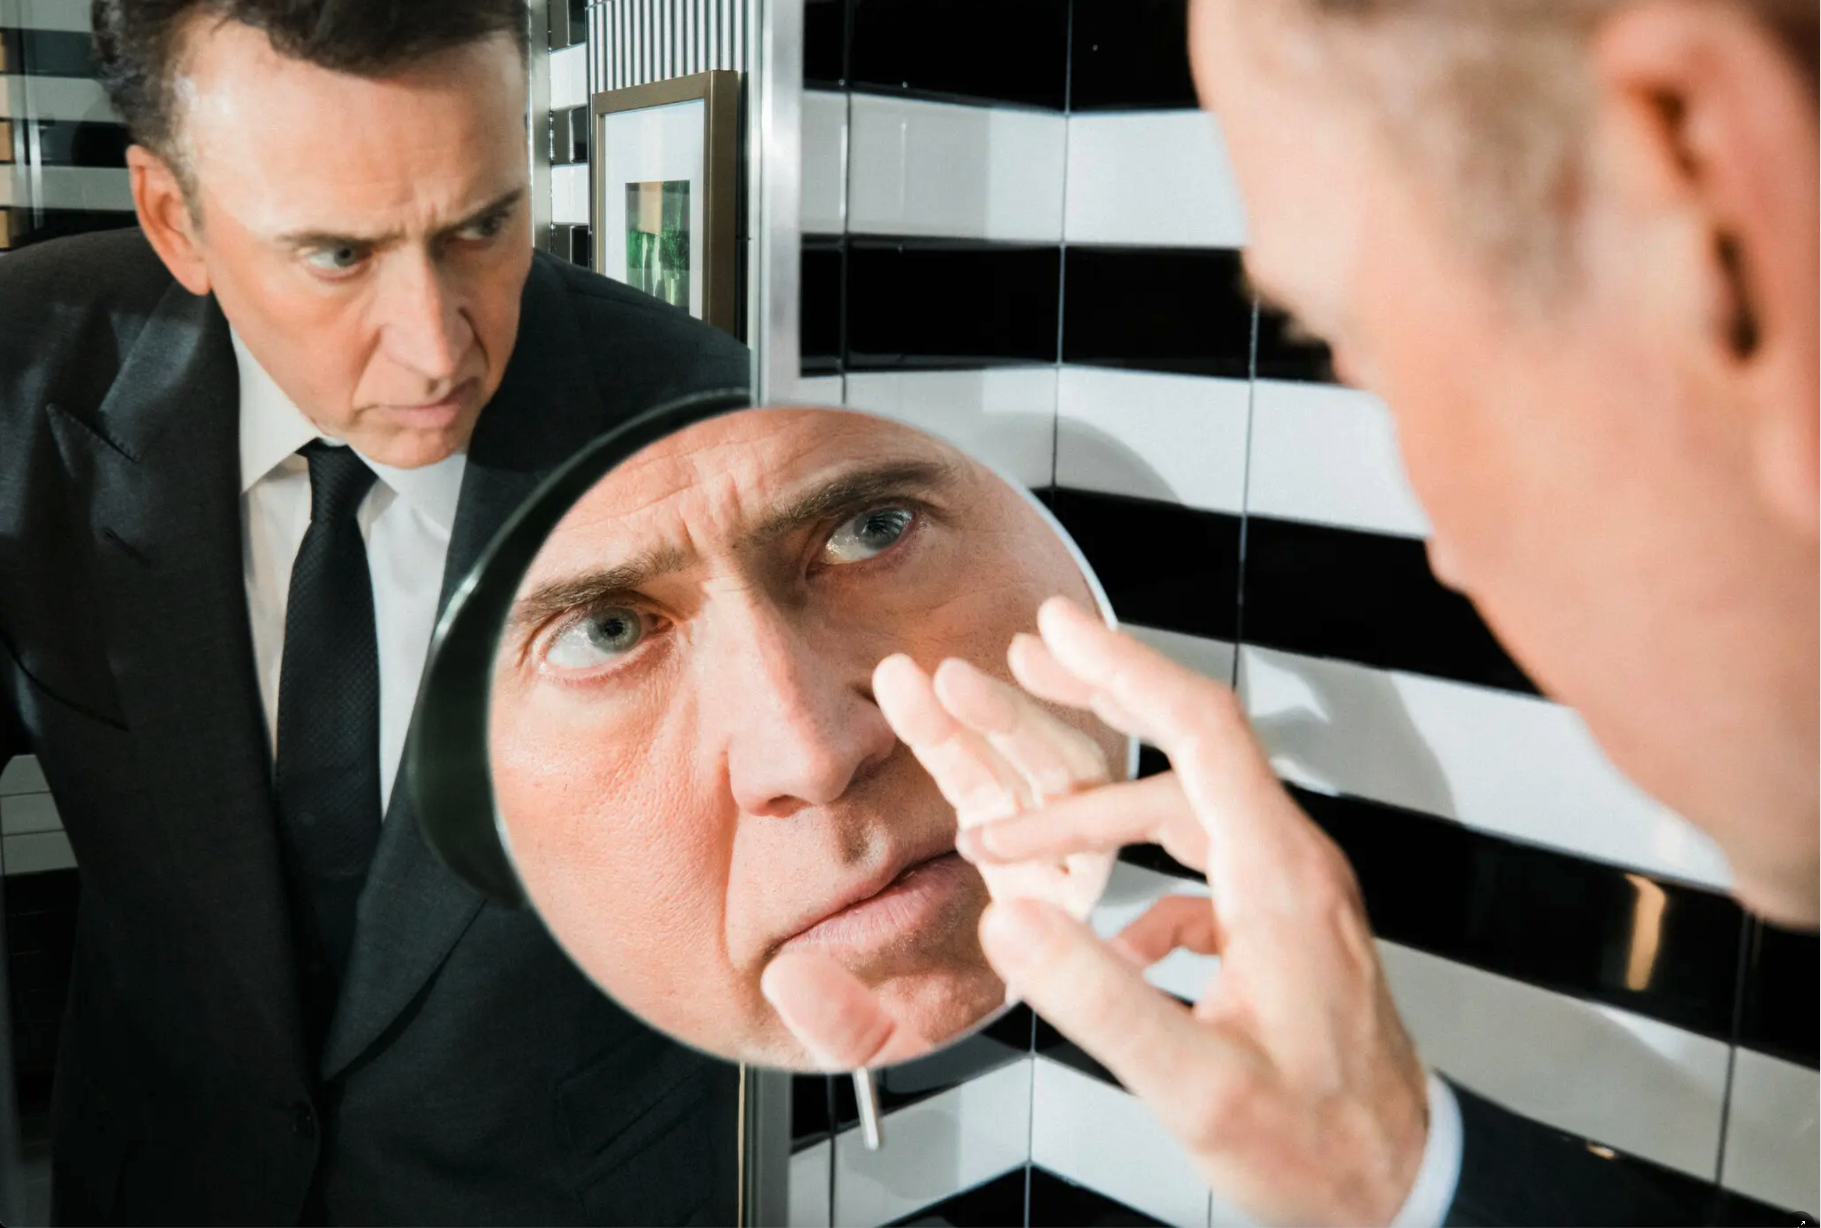 Nicolas Cage  looks at himself in the mirror as a close-up of him touching his face appears in a circle in the middle